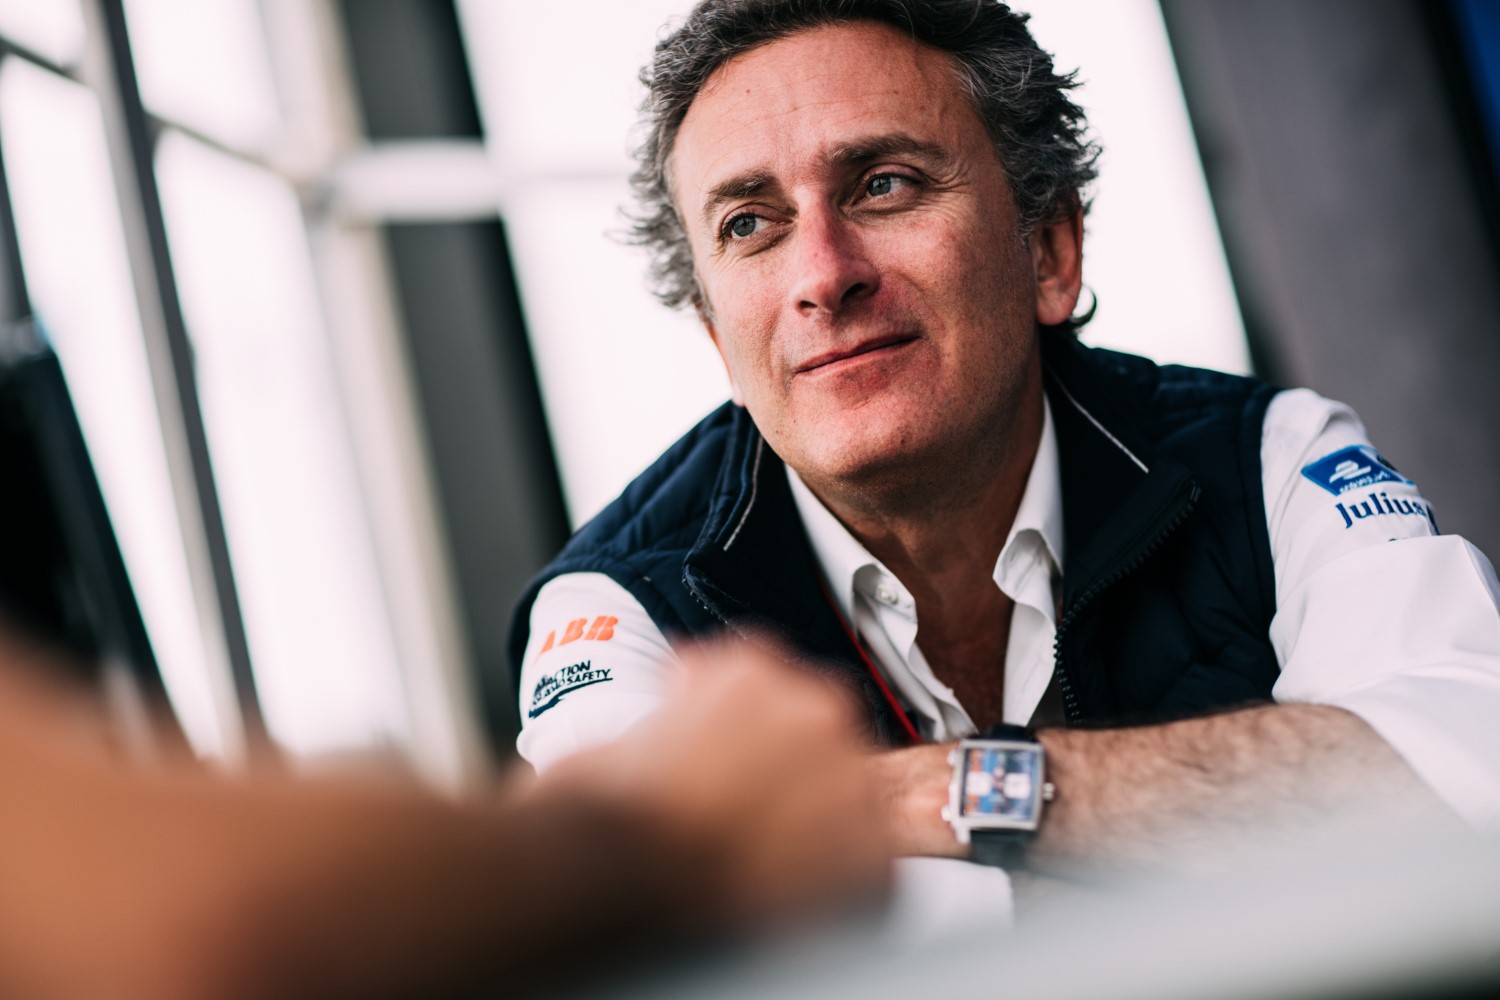 While IndyCar remains a small domestic series, Agag is making Formula E into a global powerhouse in a few short years. Formula E has attracted more manufacturers than IndyCar could ever dream of. Why? Management.